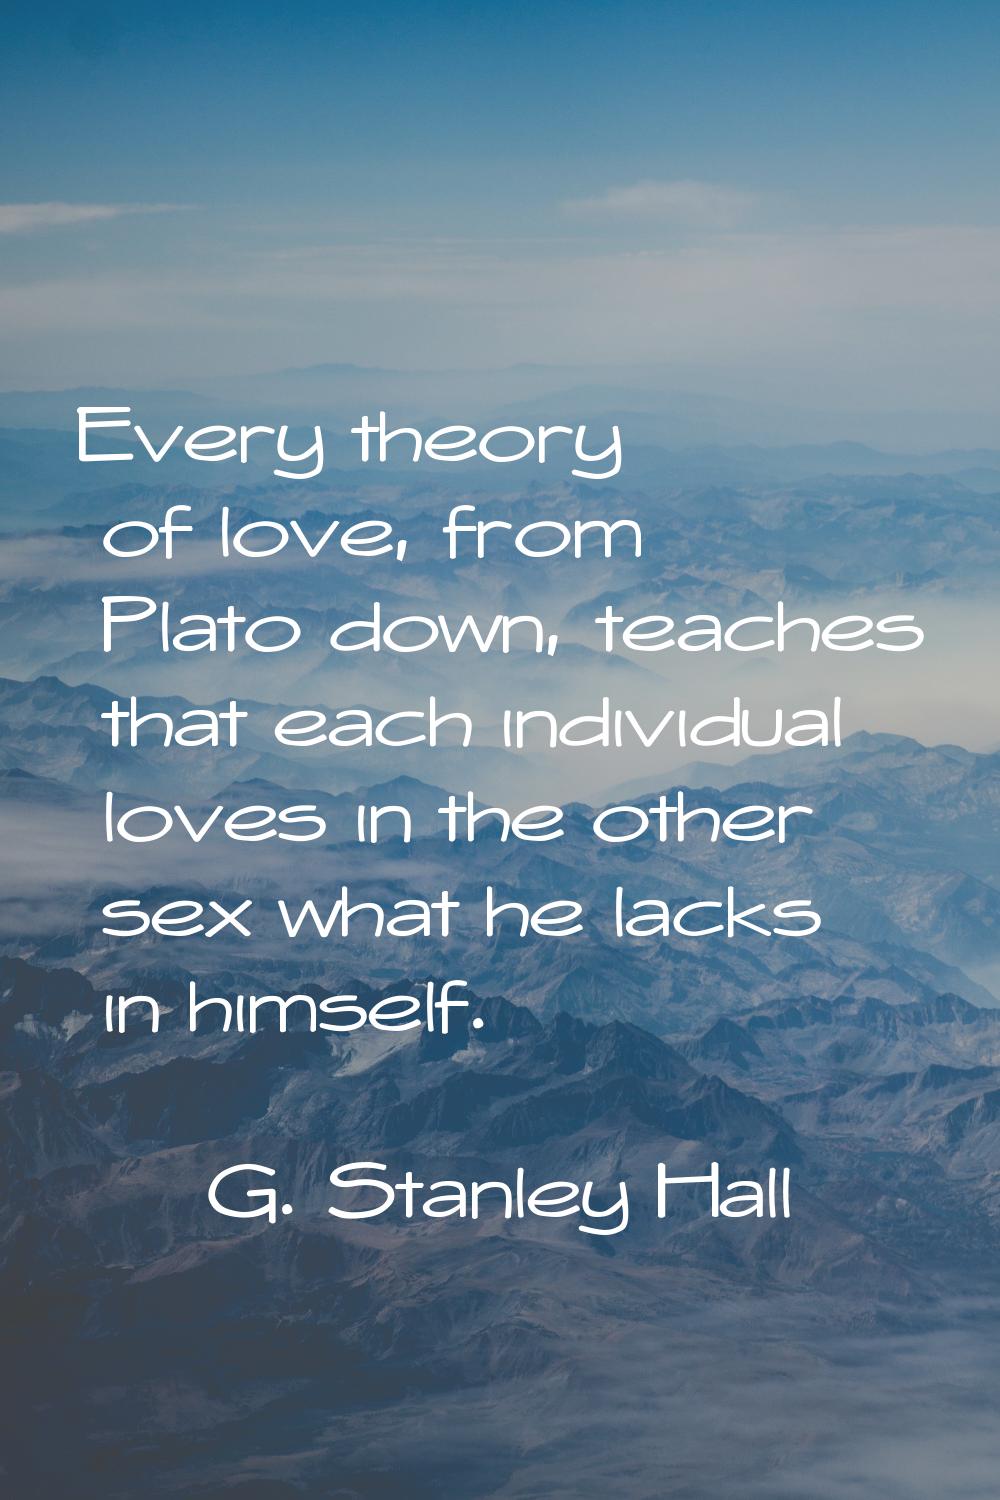 Every theory of love, from Plato down, teaches that each individual loves in the other sex what he 